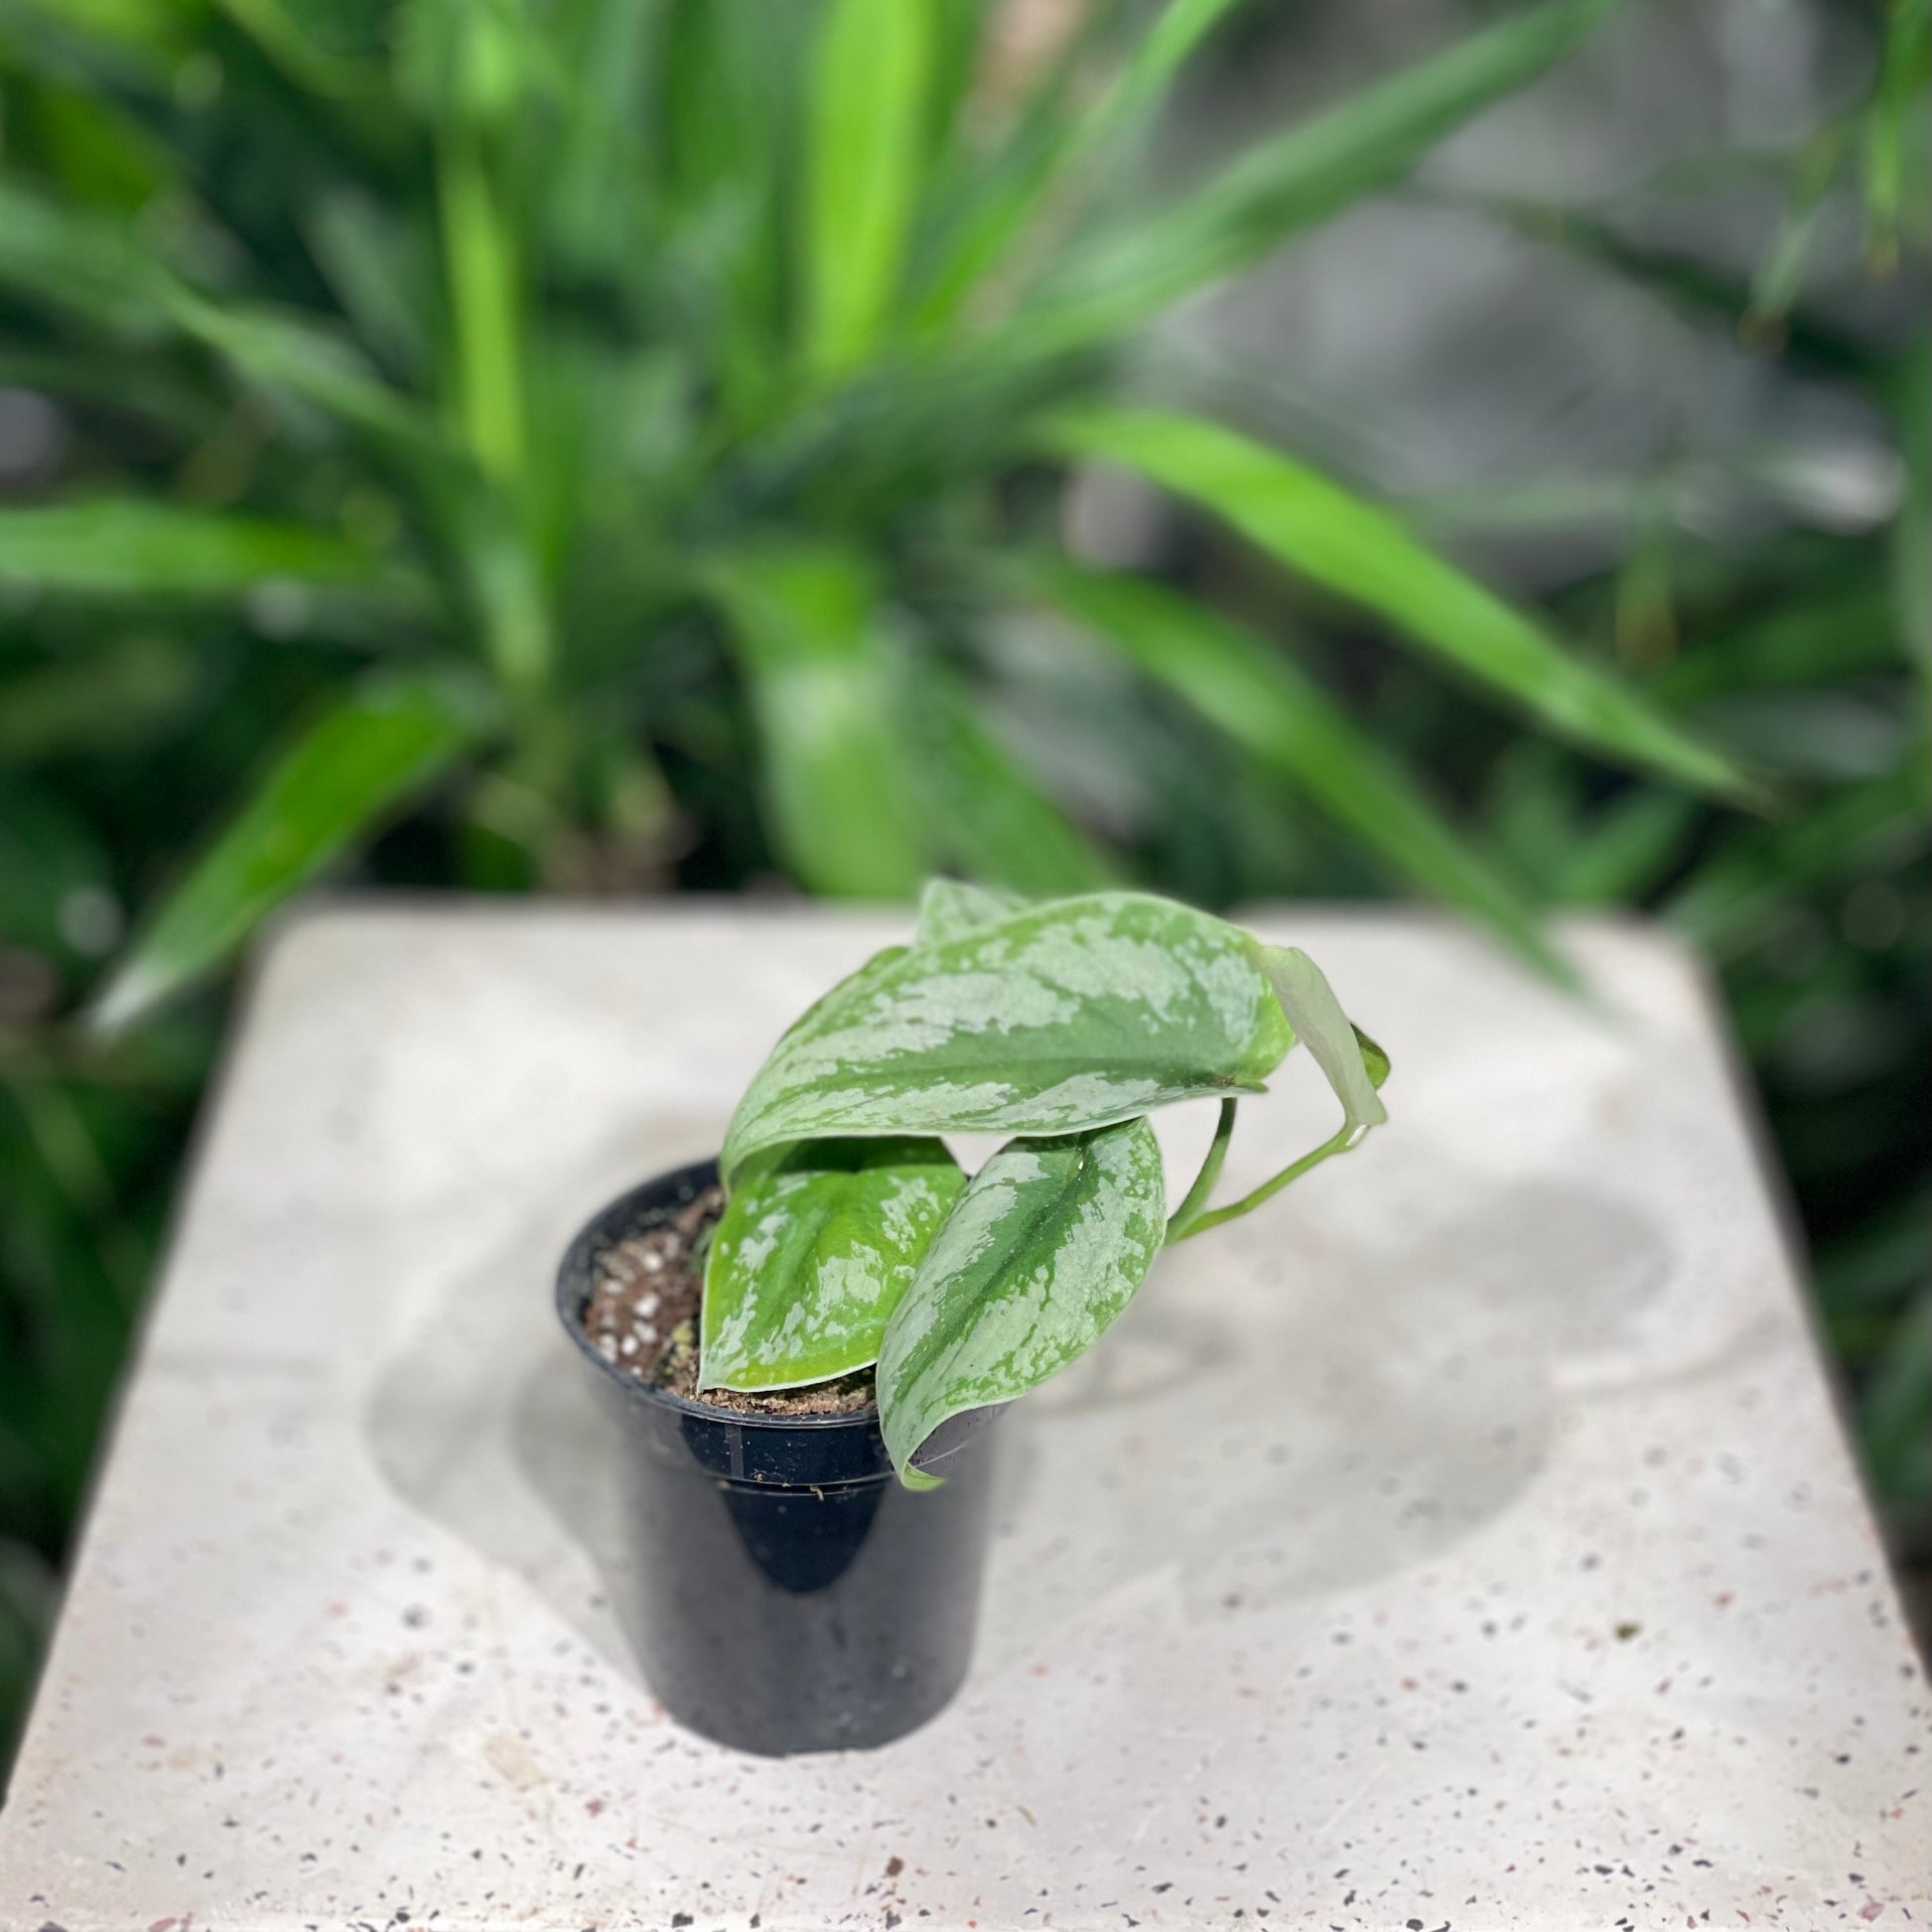 Silver Satin Pothos (Scindapsus pictus 'Exotica') in a 4 inch pot. Indoor plant for sale by Promise Supply for delivery and pickup in Toronto